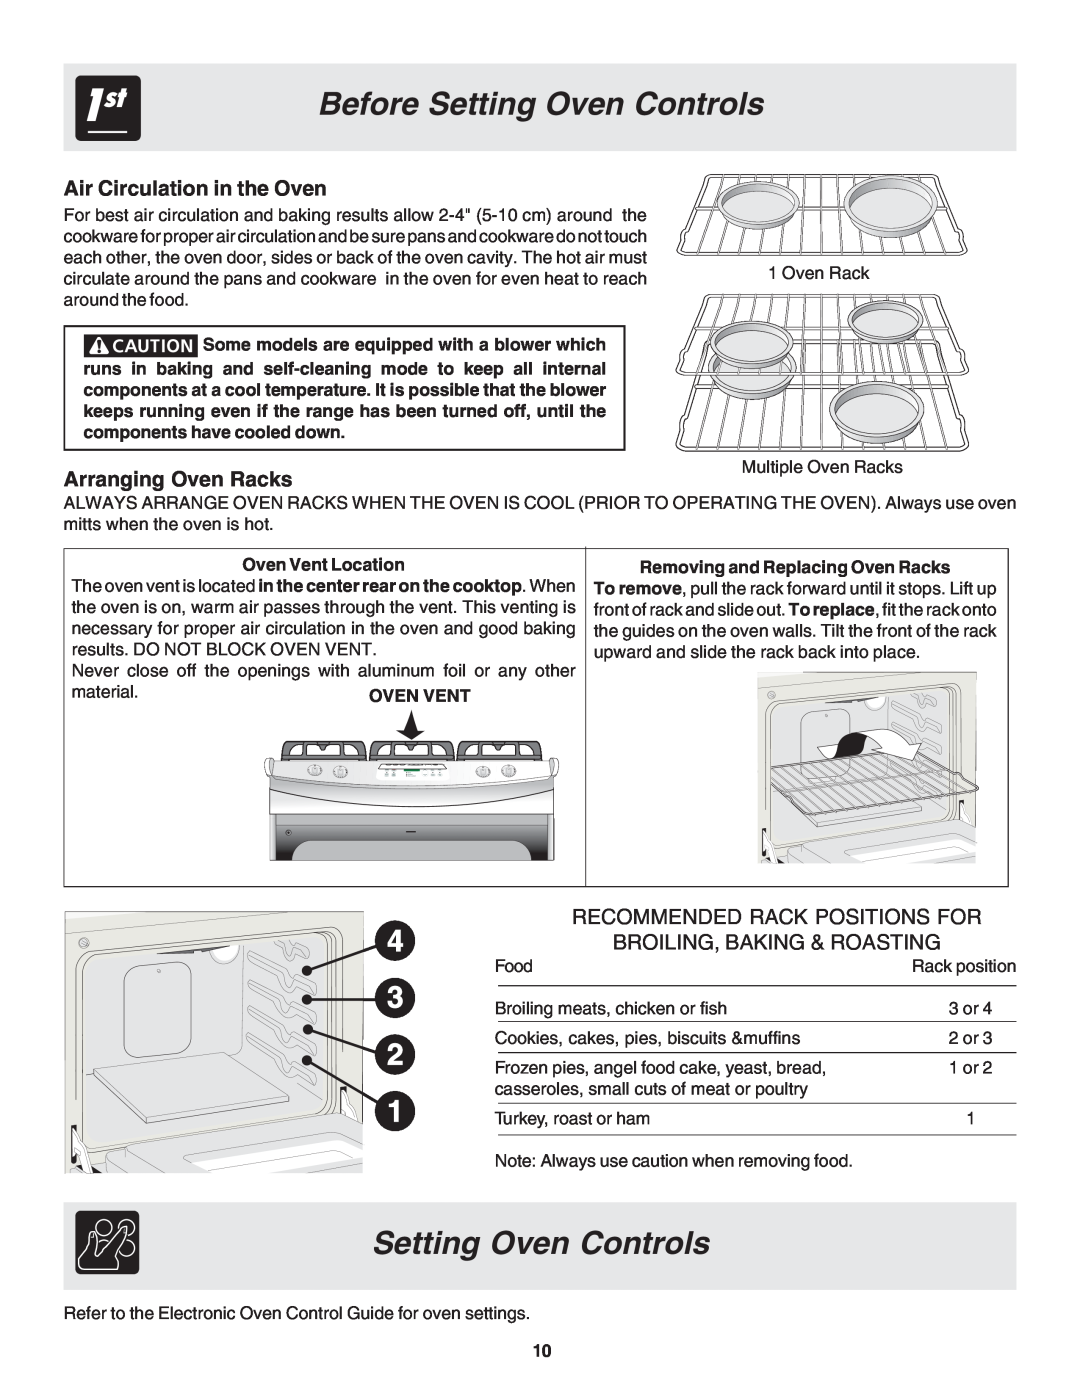 Frigidaire 318203858 warranty Before Setting Oven Controls, Air Circulation in the Oven, Arranging Oven Racks 